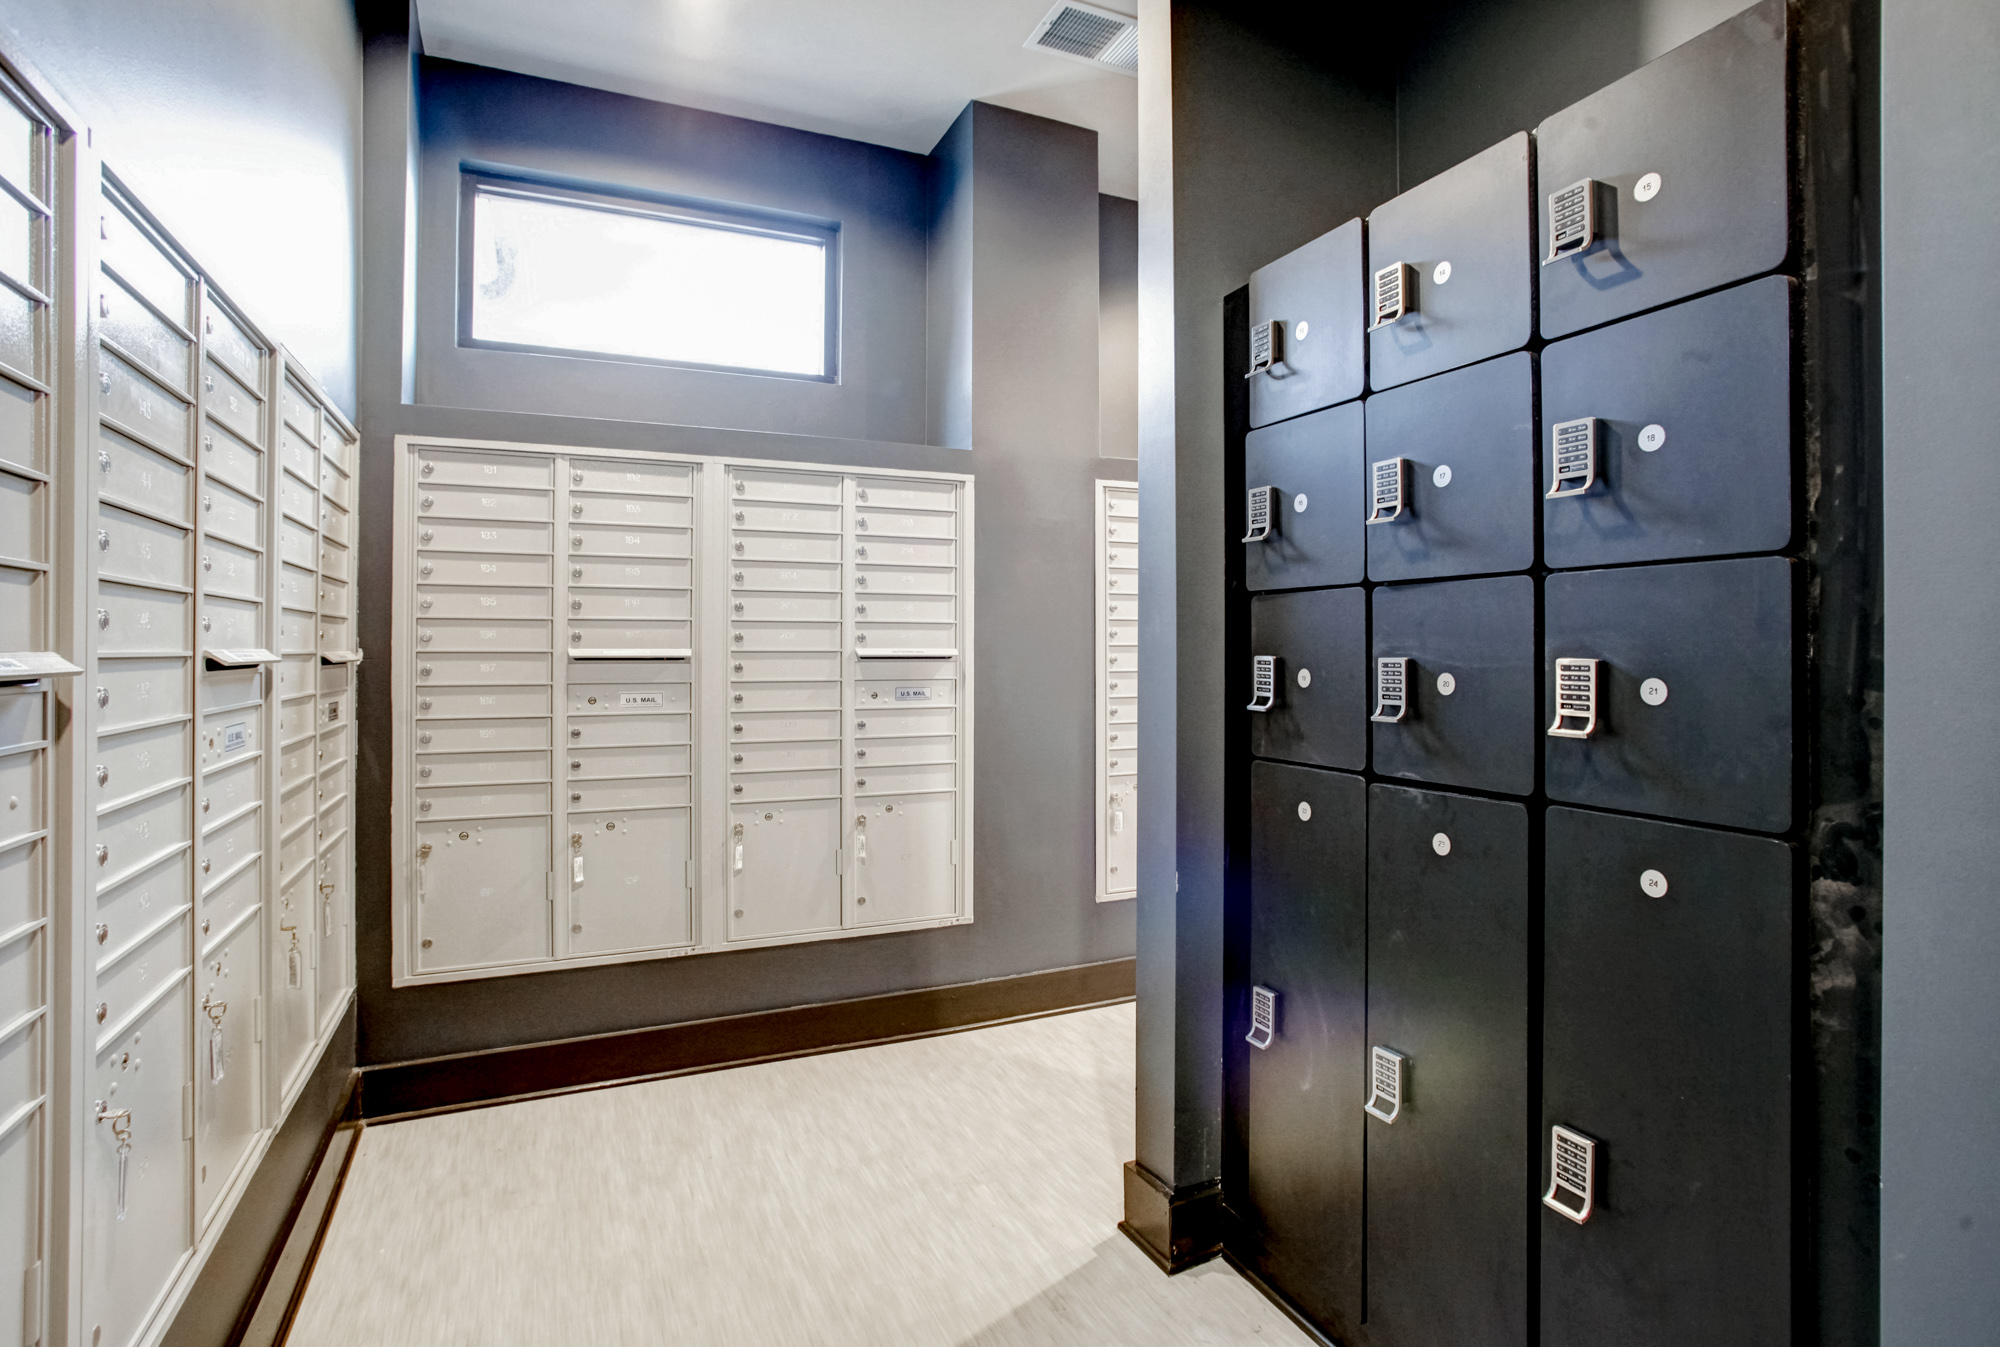 A mail room filled with mail boxes and parcel storage on the right at Park 9 apartments.